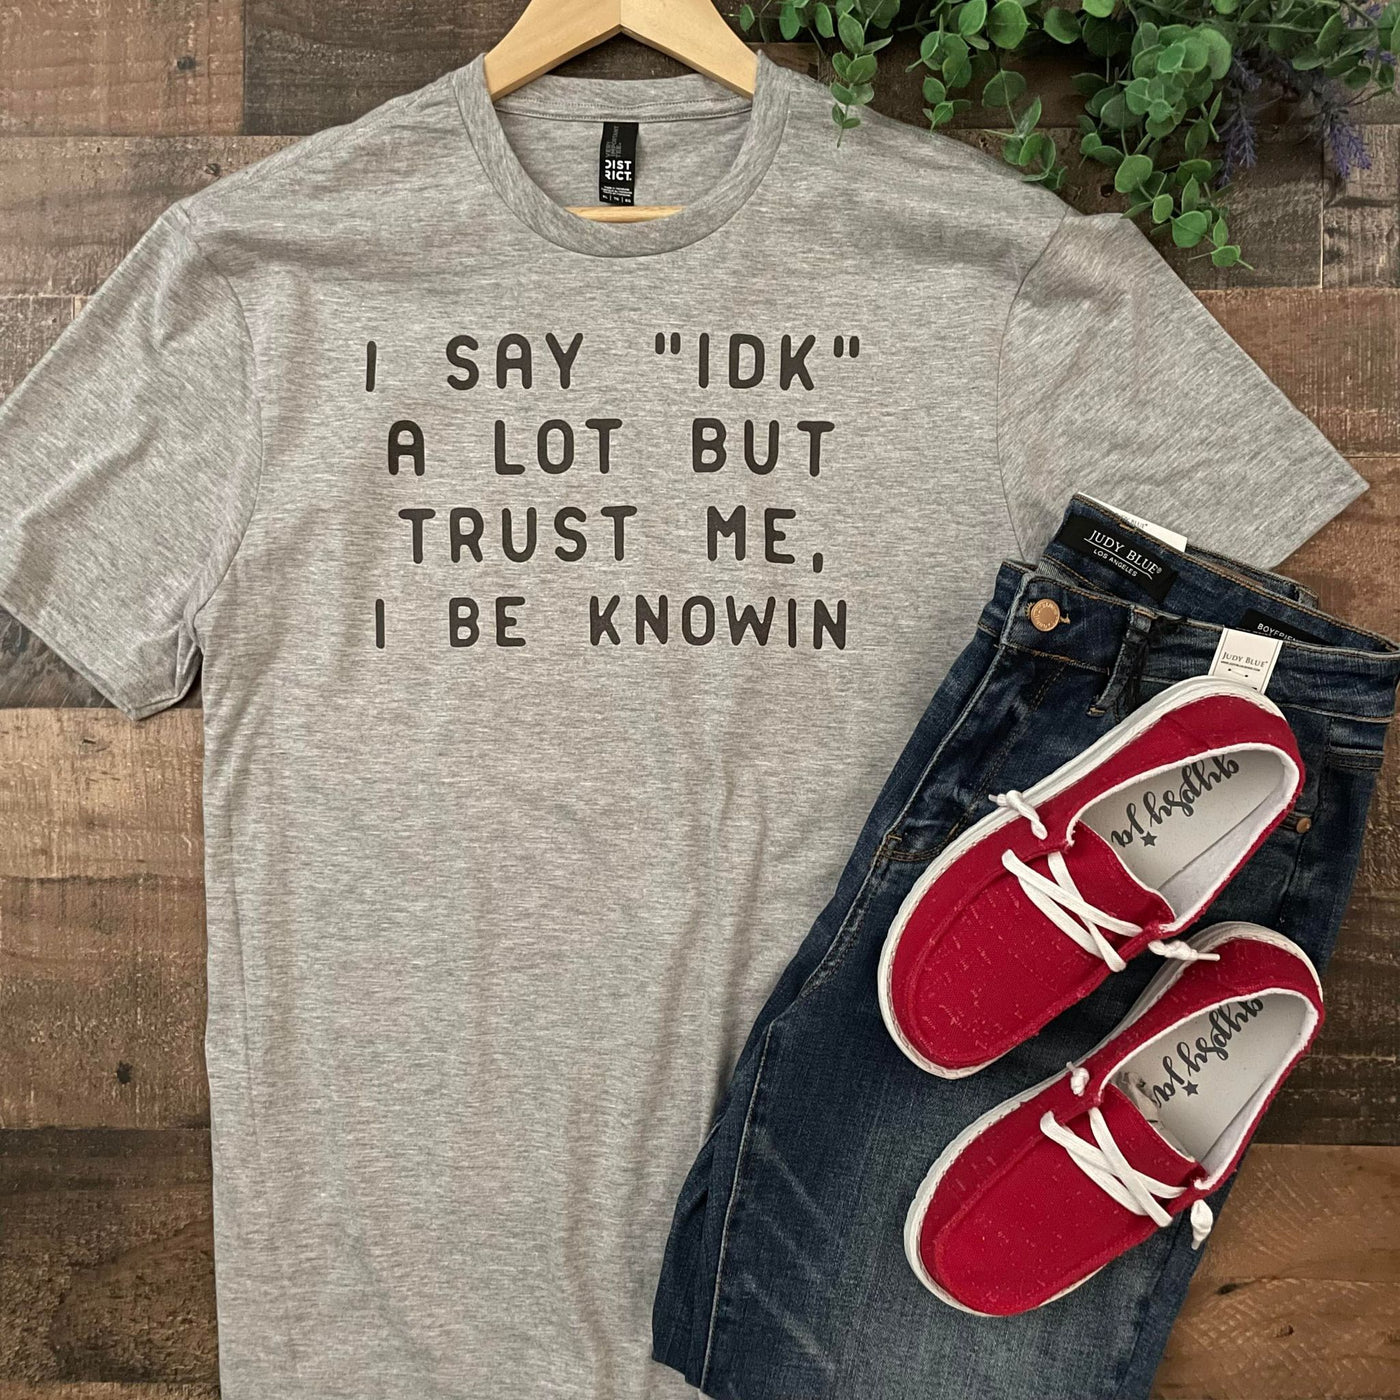 I Say "IDK" a Lot But.......Graphic Tee Shirt